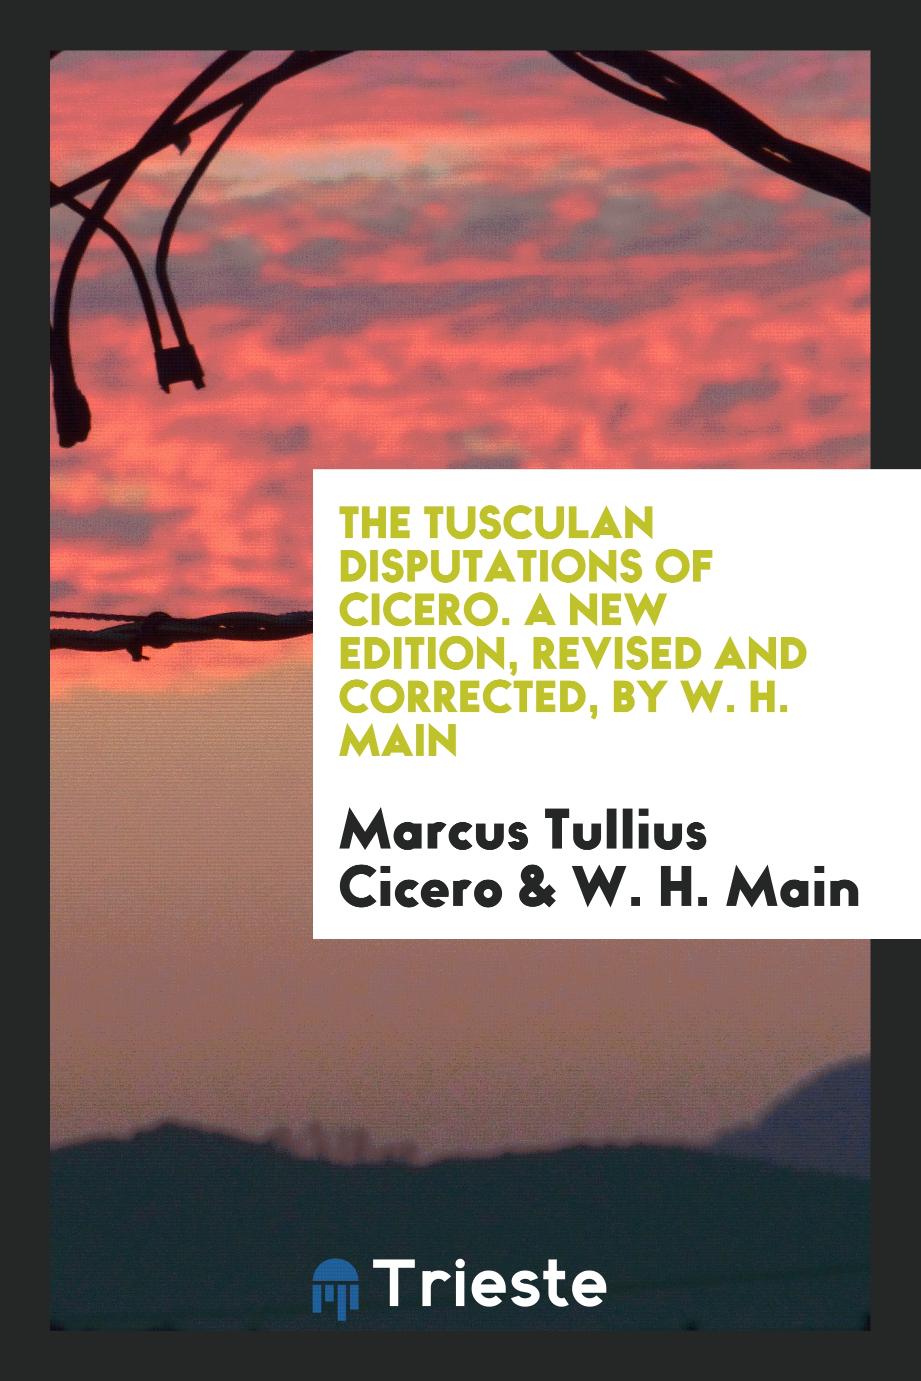 The Tusculan Disputations of Cicero. A New Edition, Revised and Corrected, by W. H. Main